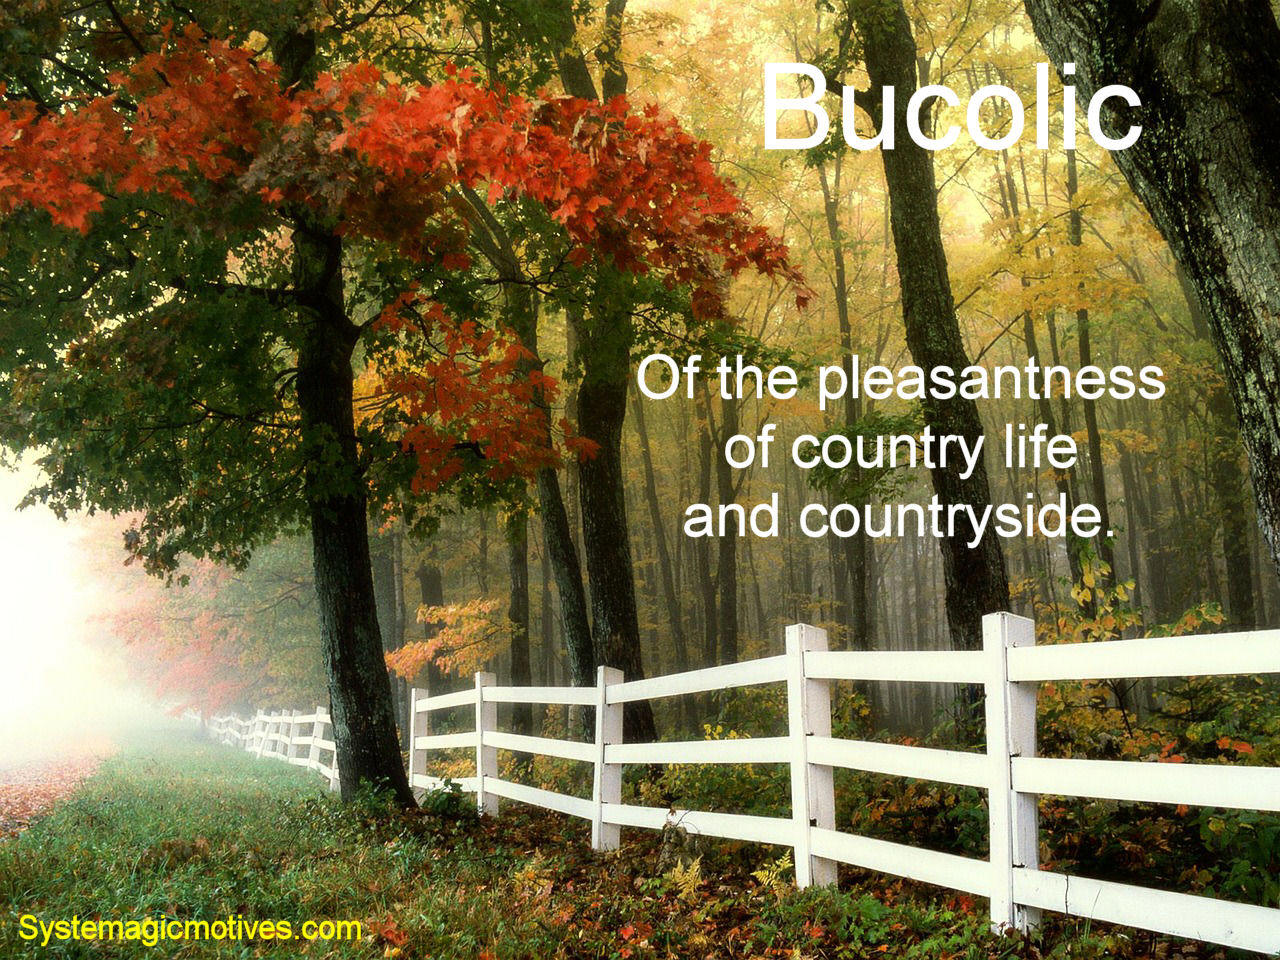 Graphic Definition of Bucolic